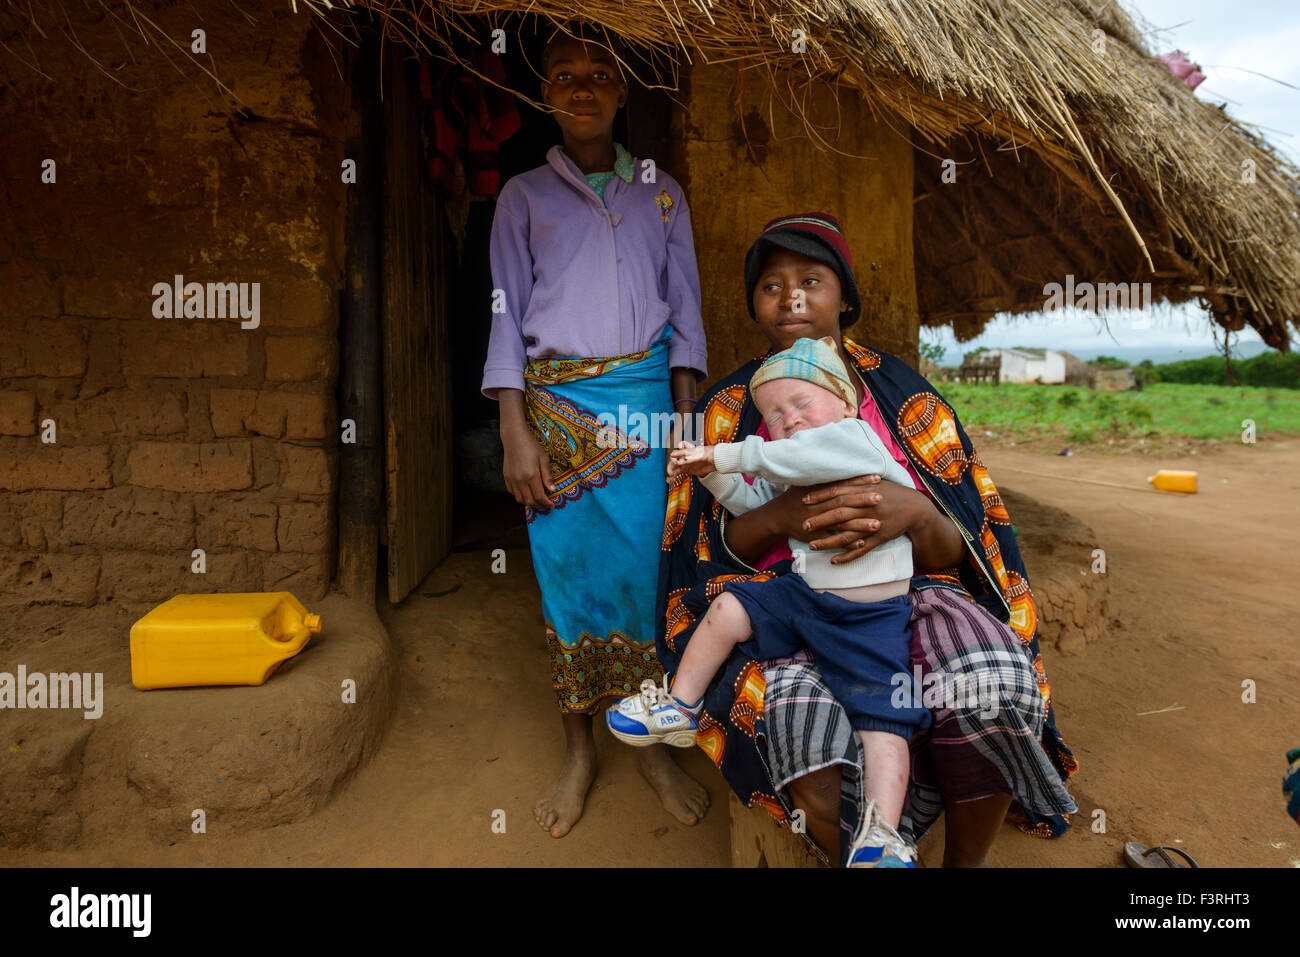 Woman with albino boy sitting in front of their thatched hut, Mozambique, Africa Stock Photo